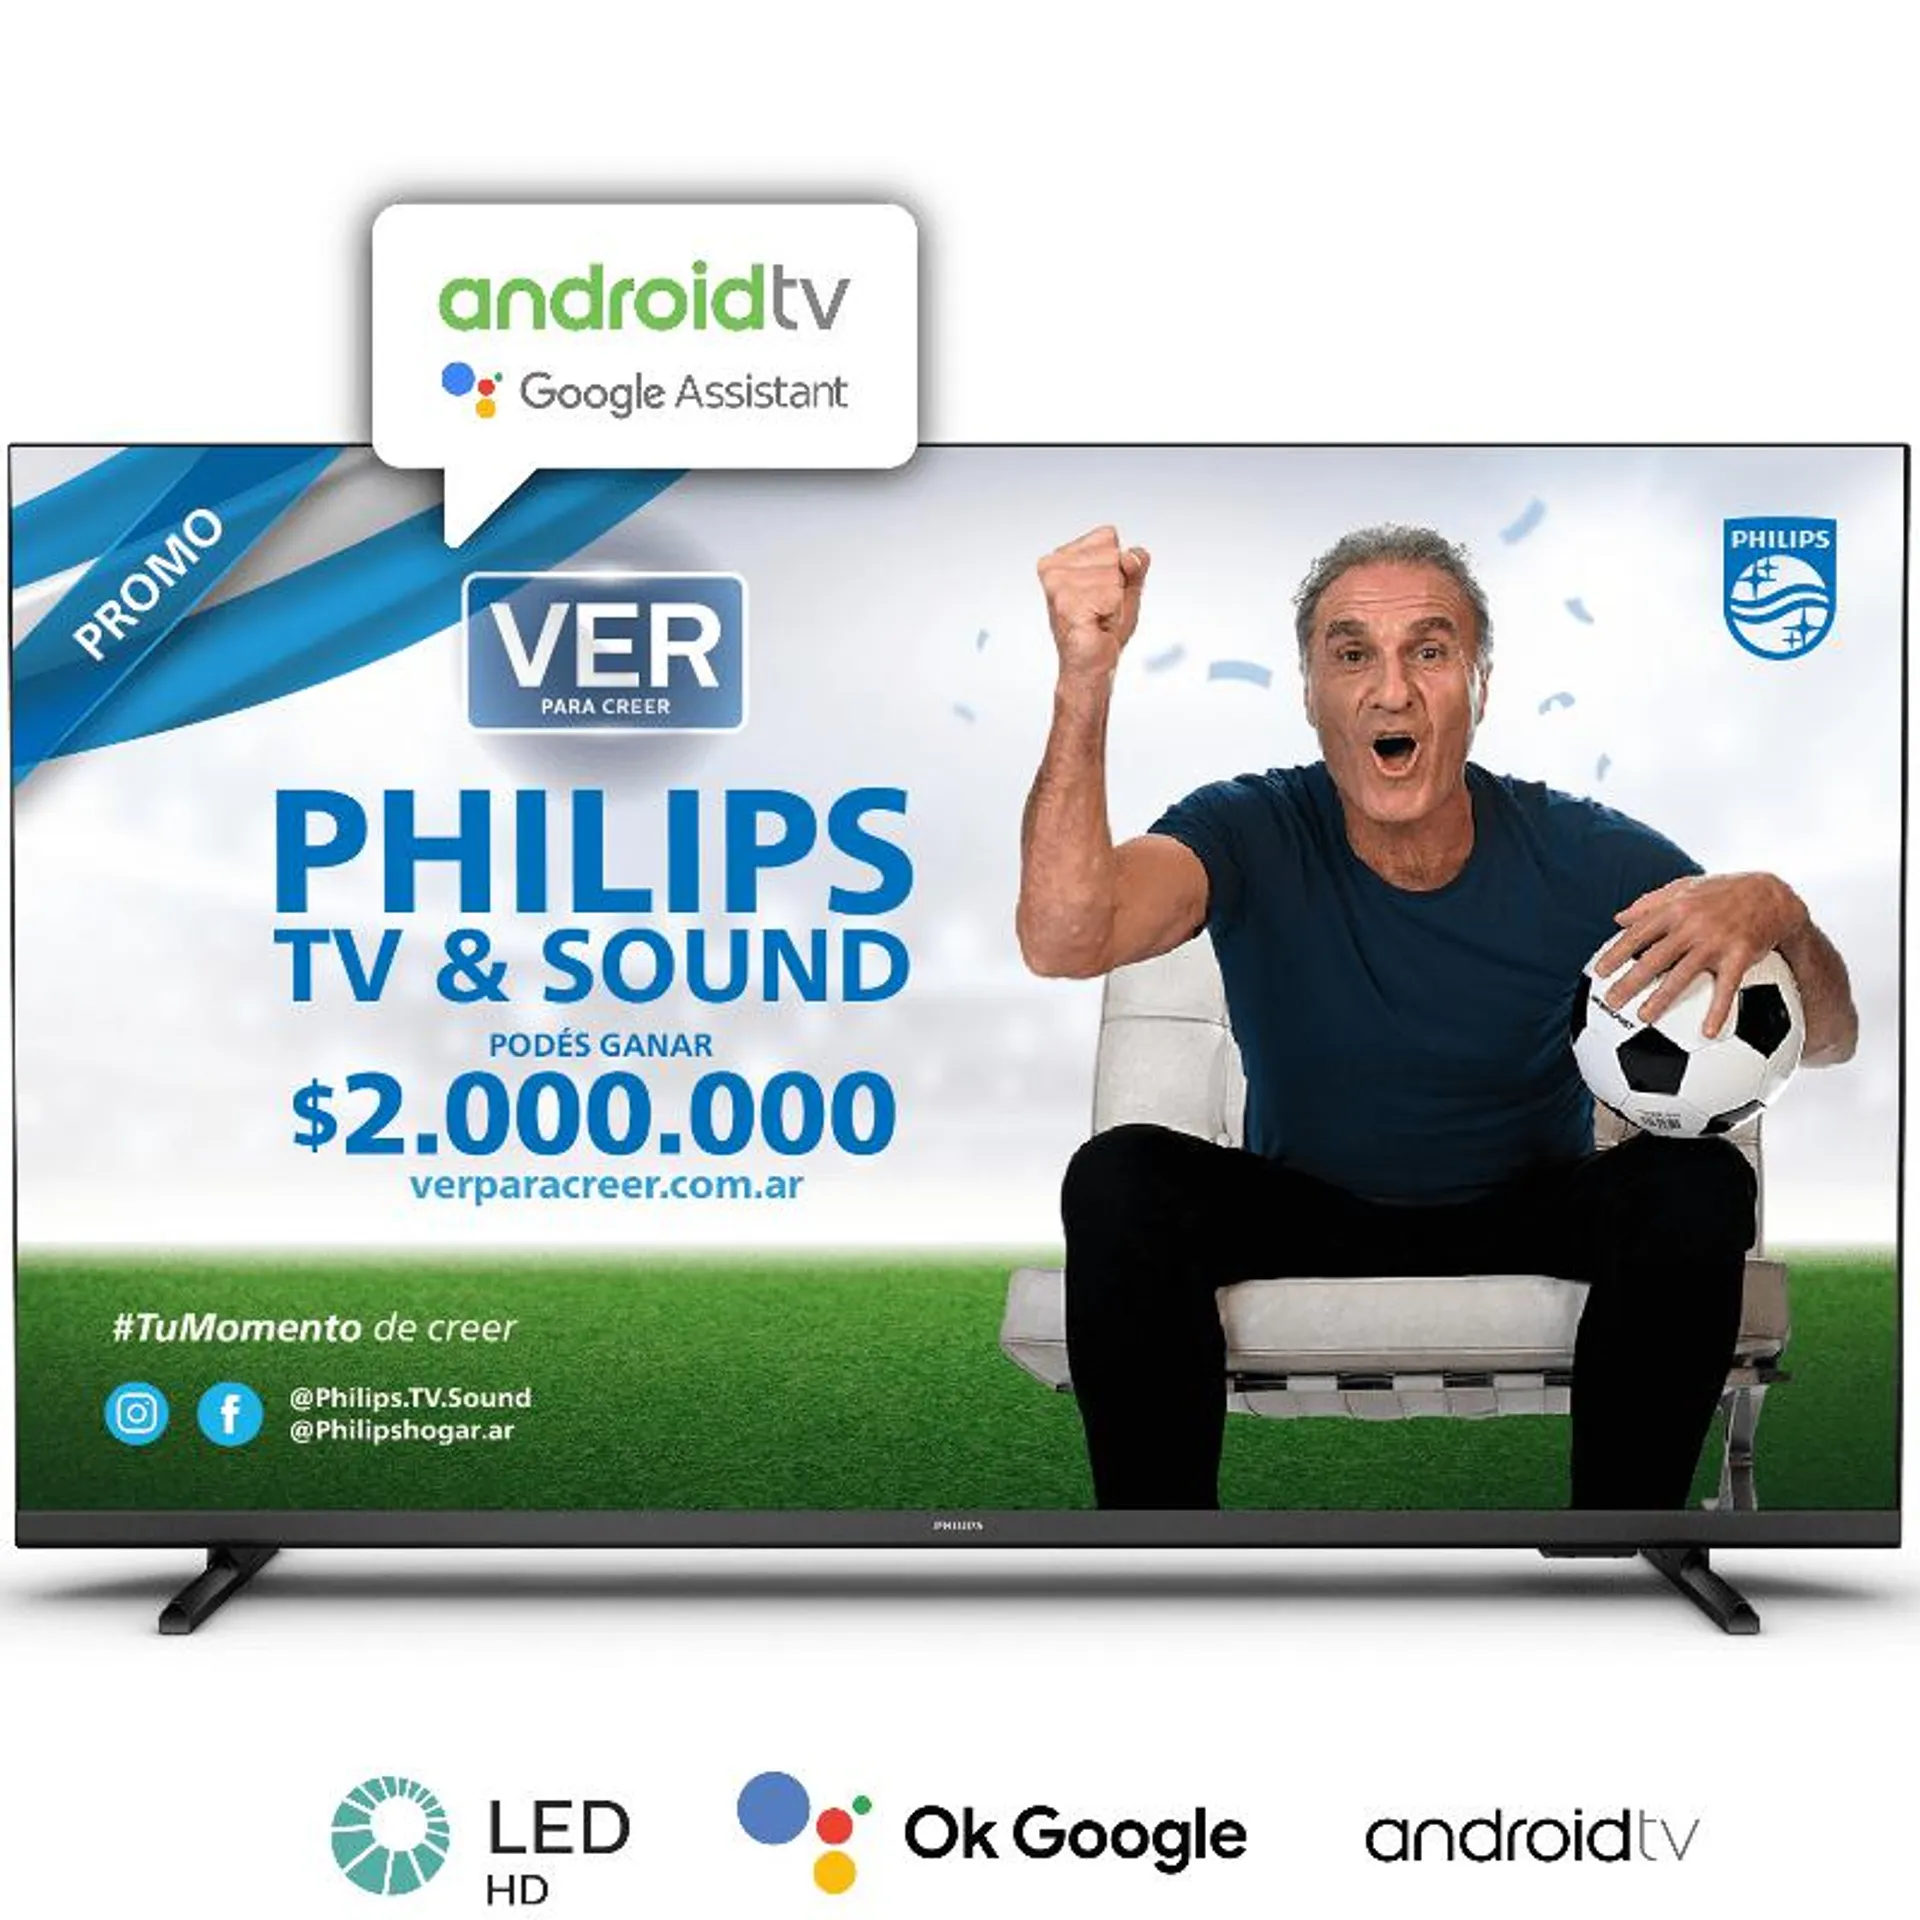 ANDROID TV 32" HD 32PHD6917/77